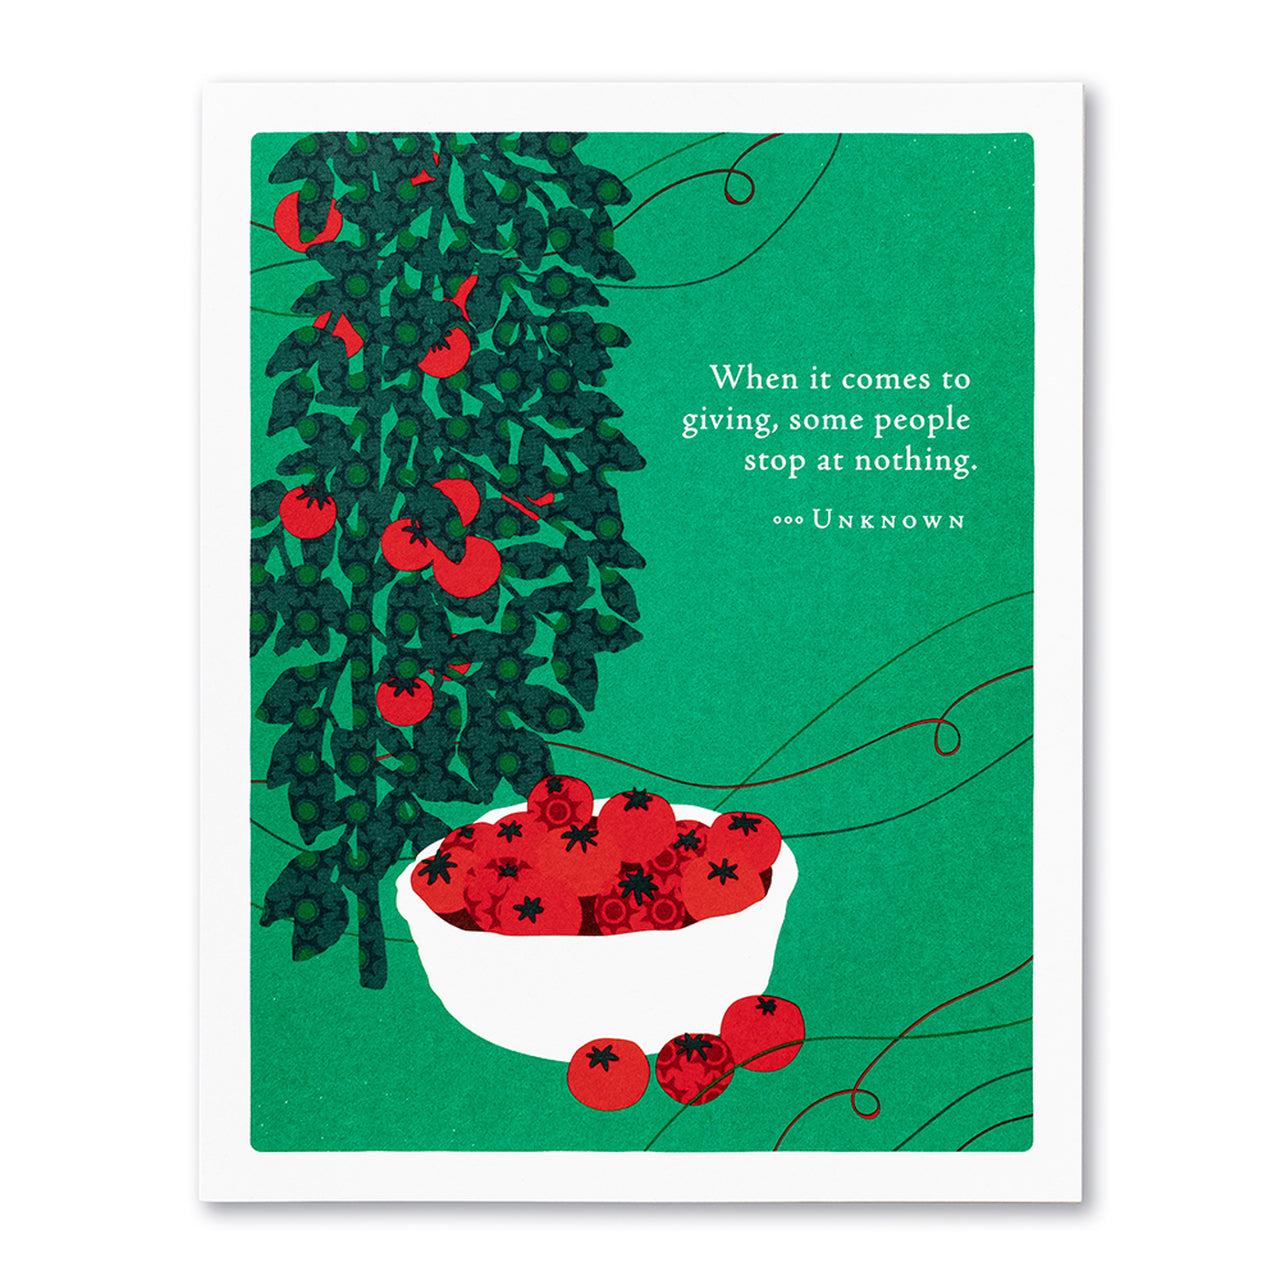 front is tomatoes in a bowl and on a vine with text